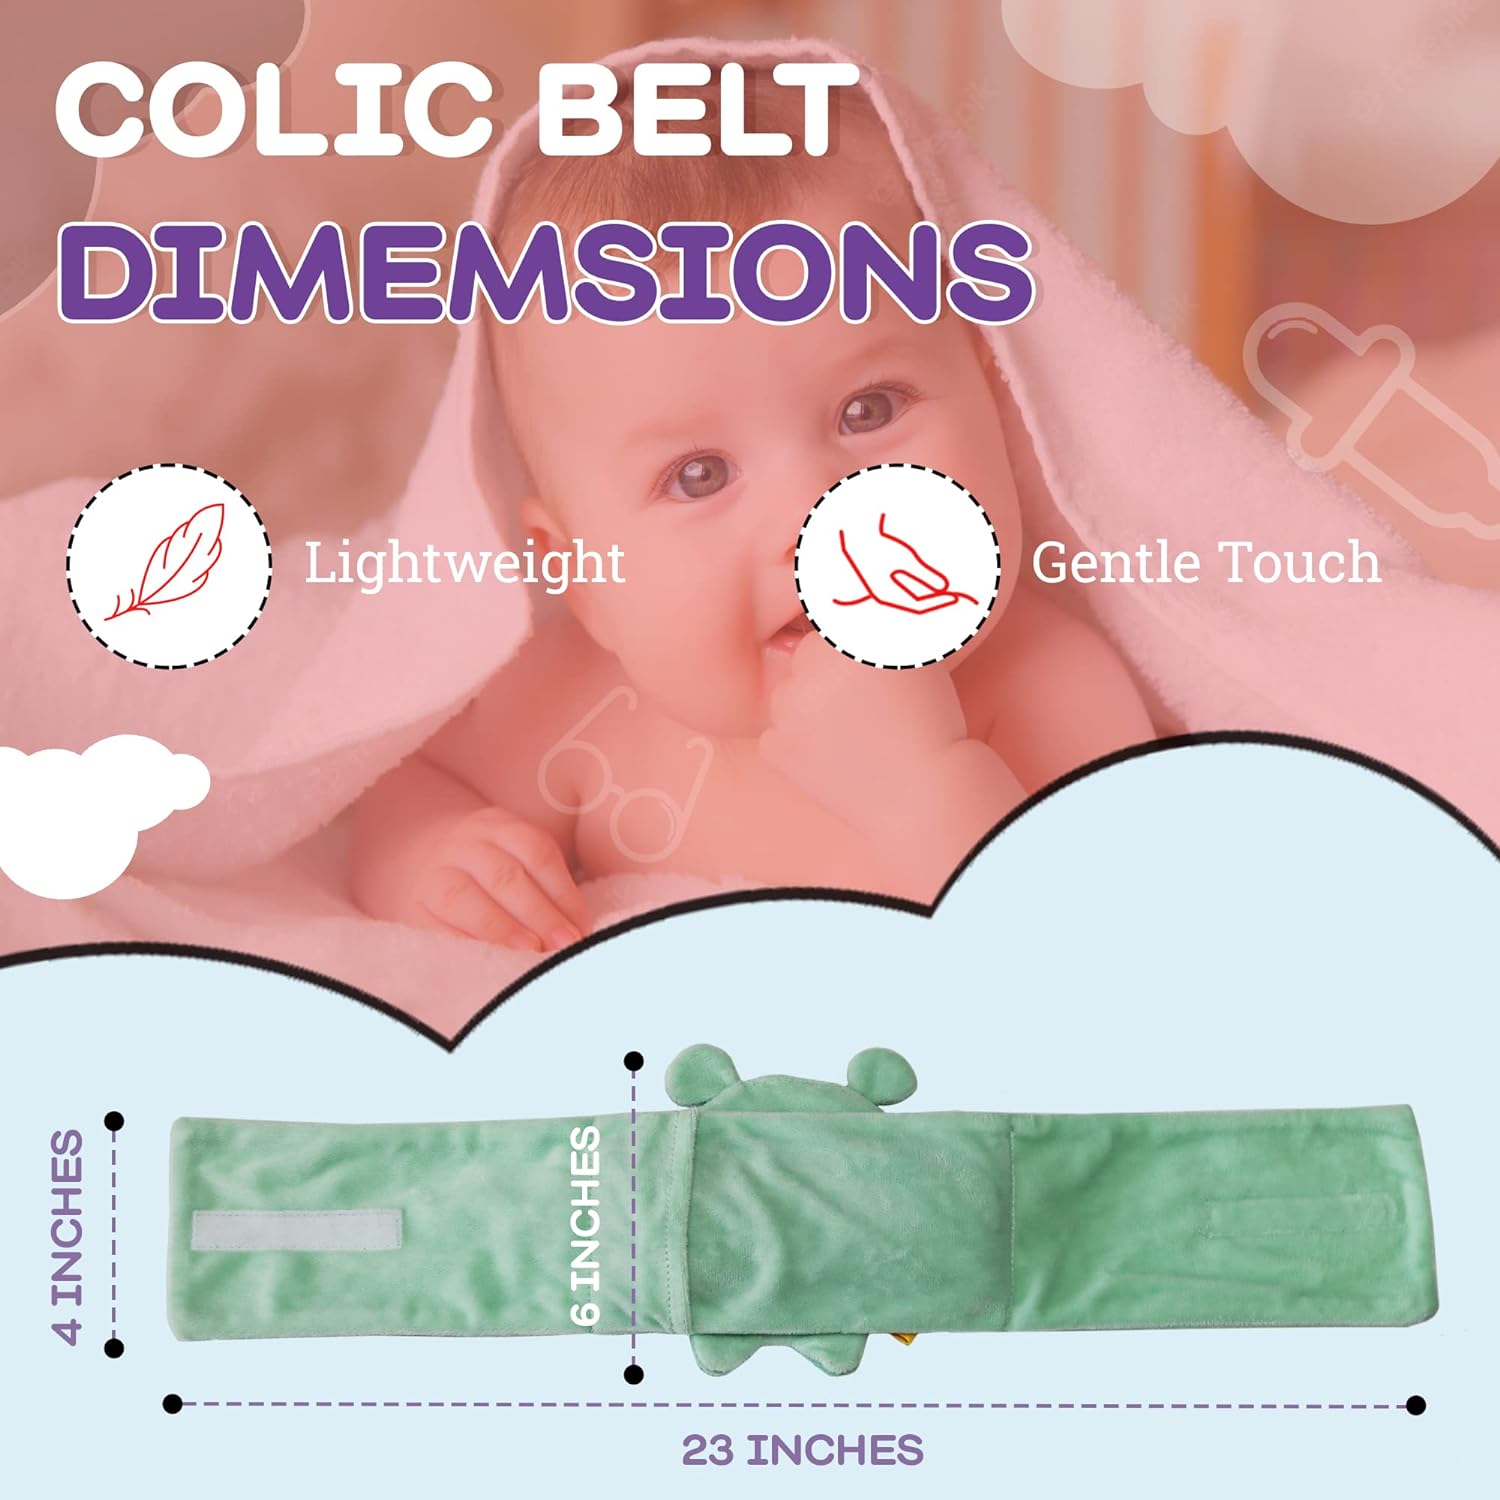 MAMAR Baby Colic Belt - Baby Belly Band for Gas and Colic Relief for Newborns - Baby Stomach Wrap  Tummy Hugger for Swaddling - Includes Warm Compression via Microwave-Safe Gel Heat Pad for Infant